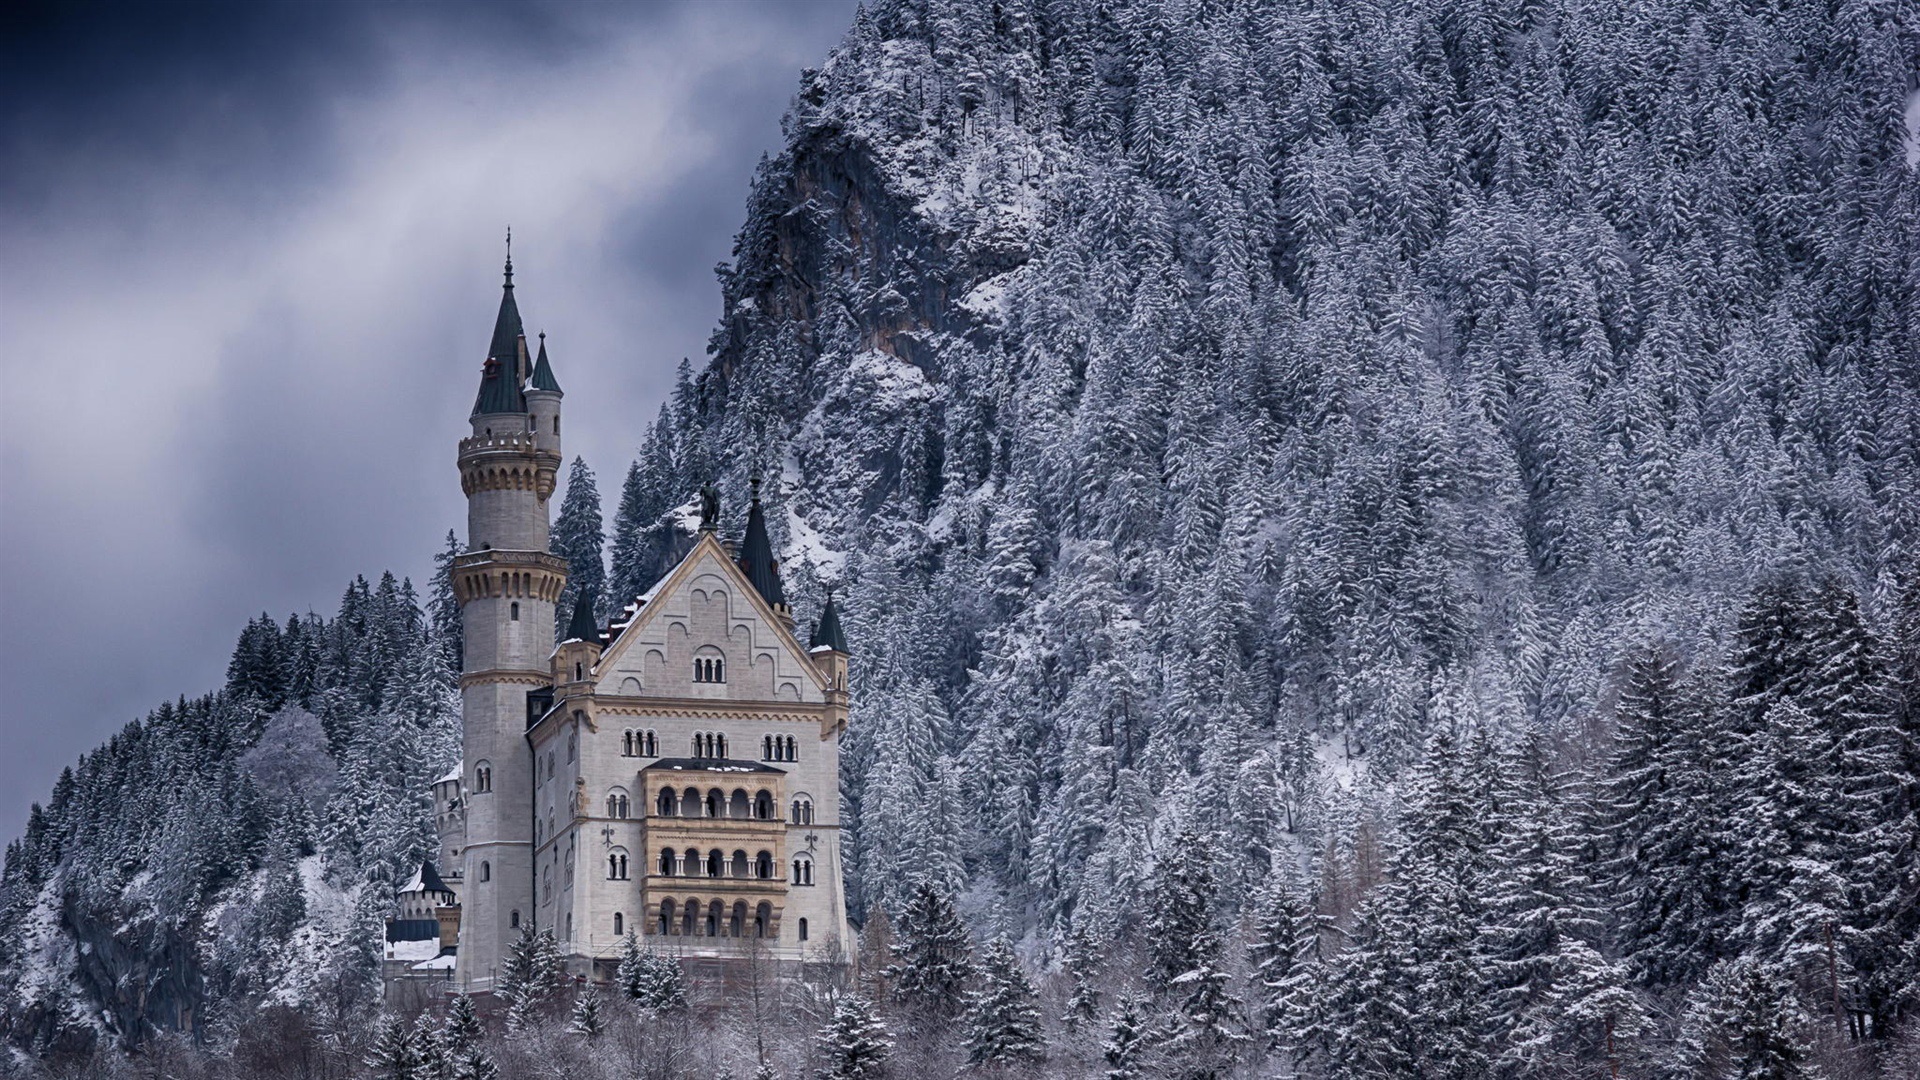 General 1920x1080 Germany castle forest winter clouds nature trees landscape